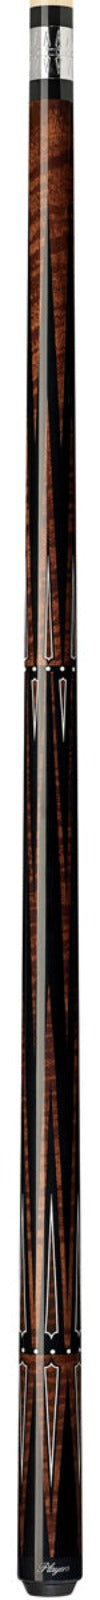 Players Players AC20 Pool Cue Pool Cue